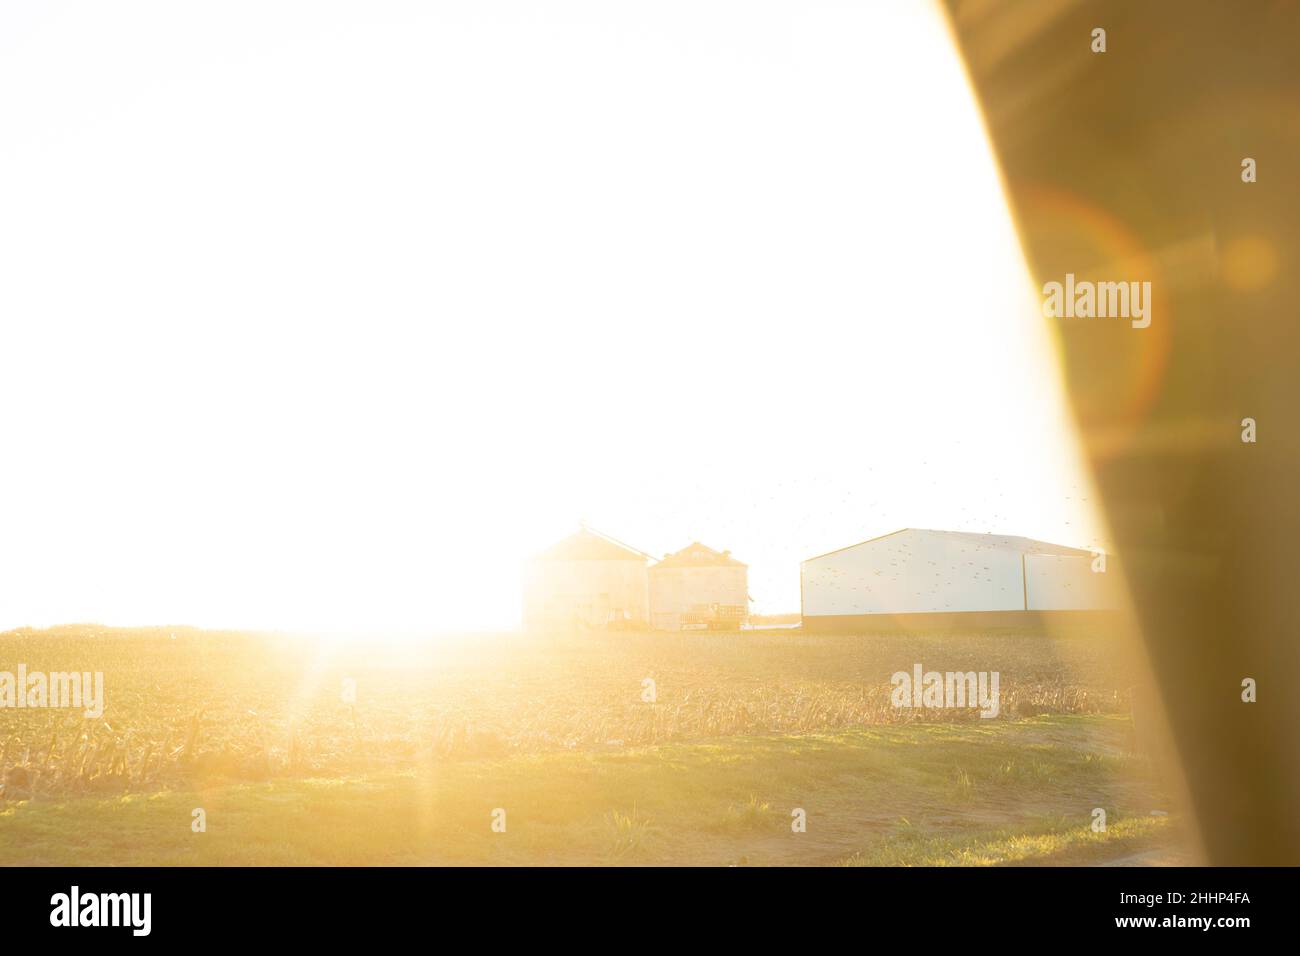 Grain bins and barn at sunrise in the midwest, view out of a car window. Stock Photo